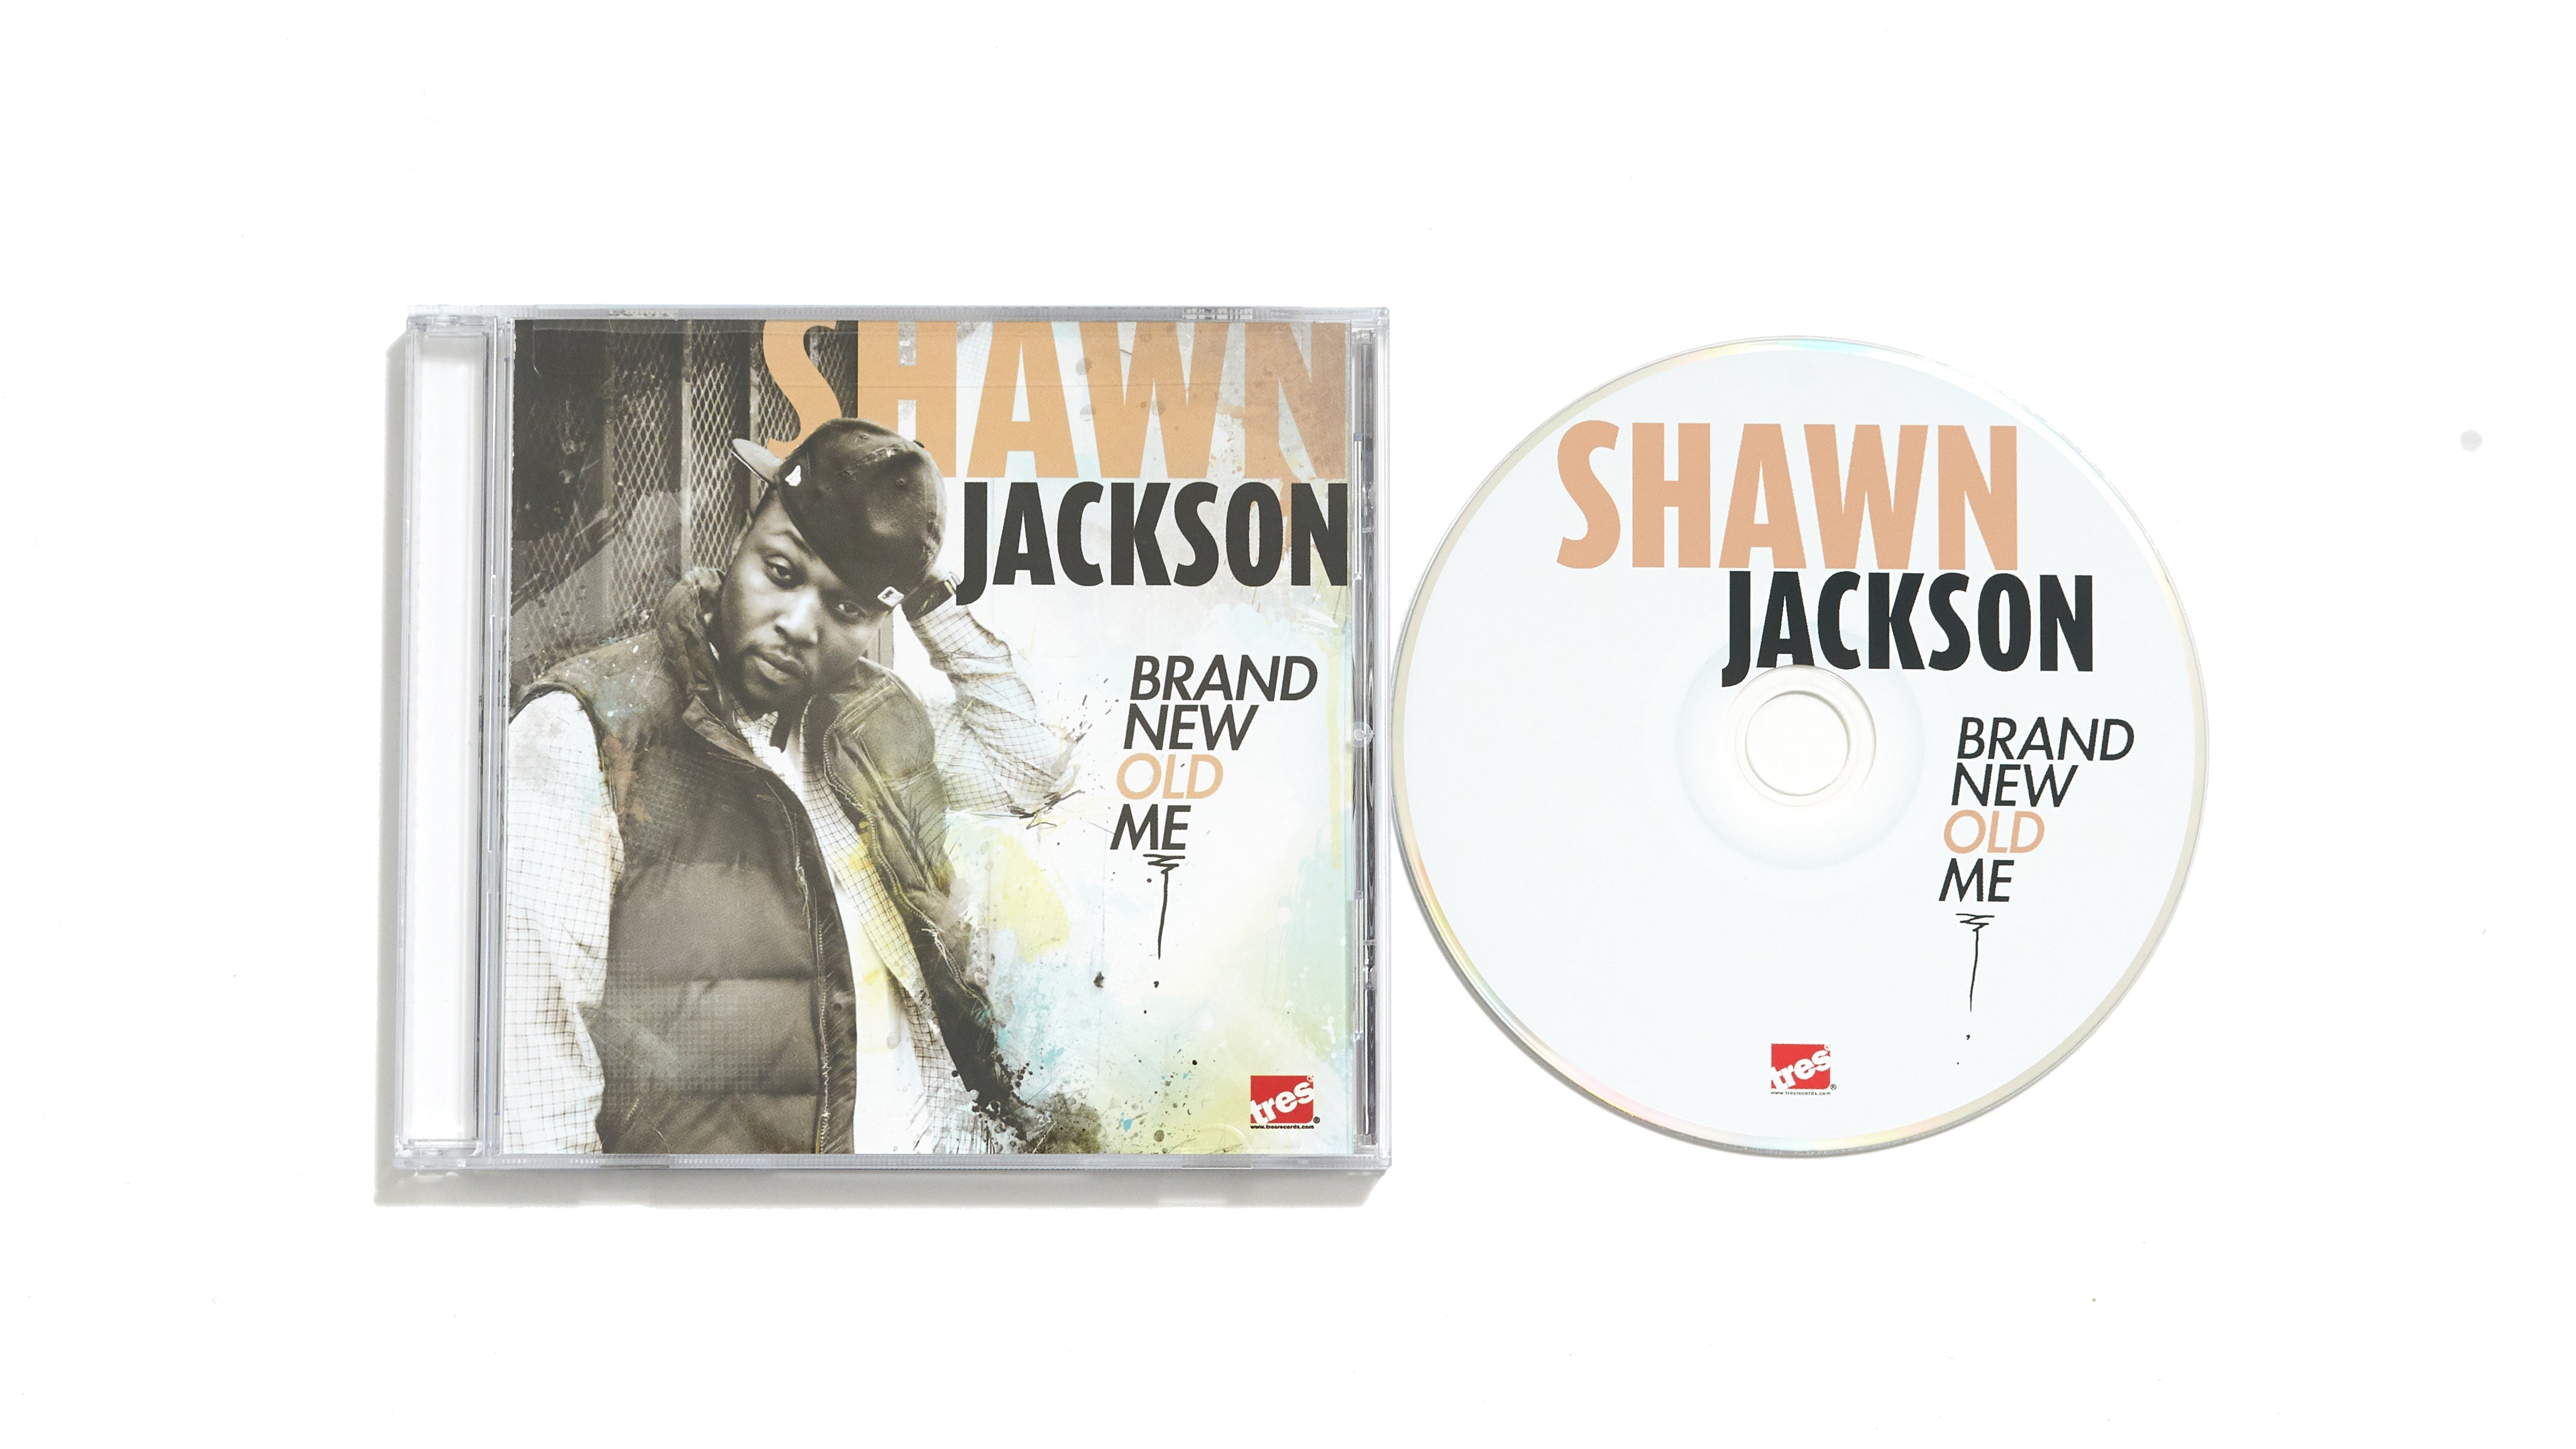 Shawn Jackson "Brand New Old Me" (CD)